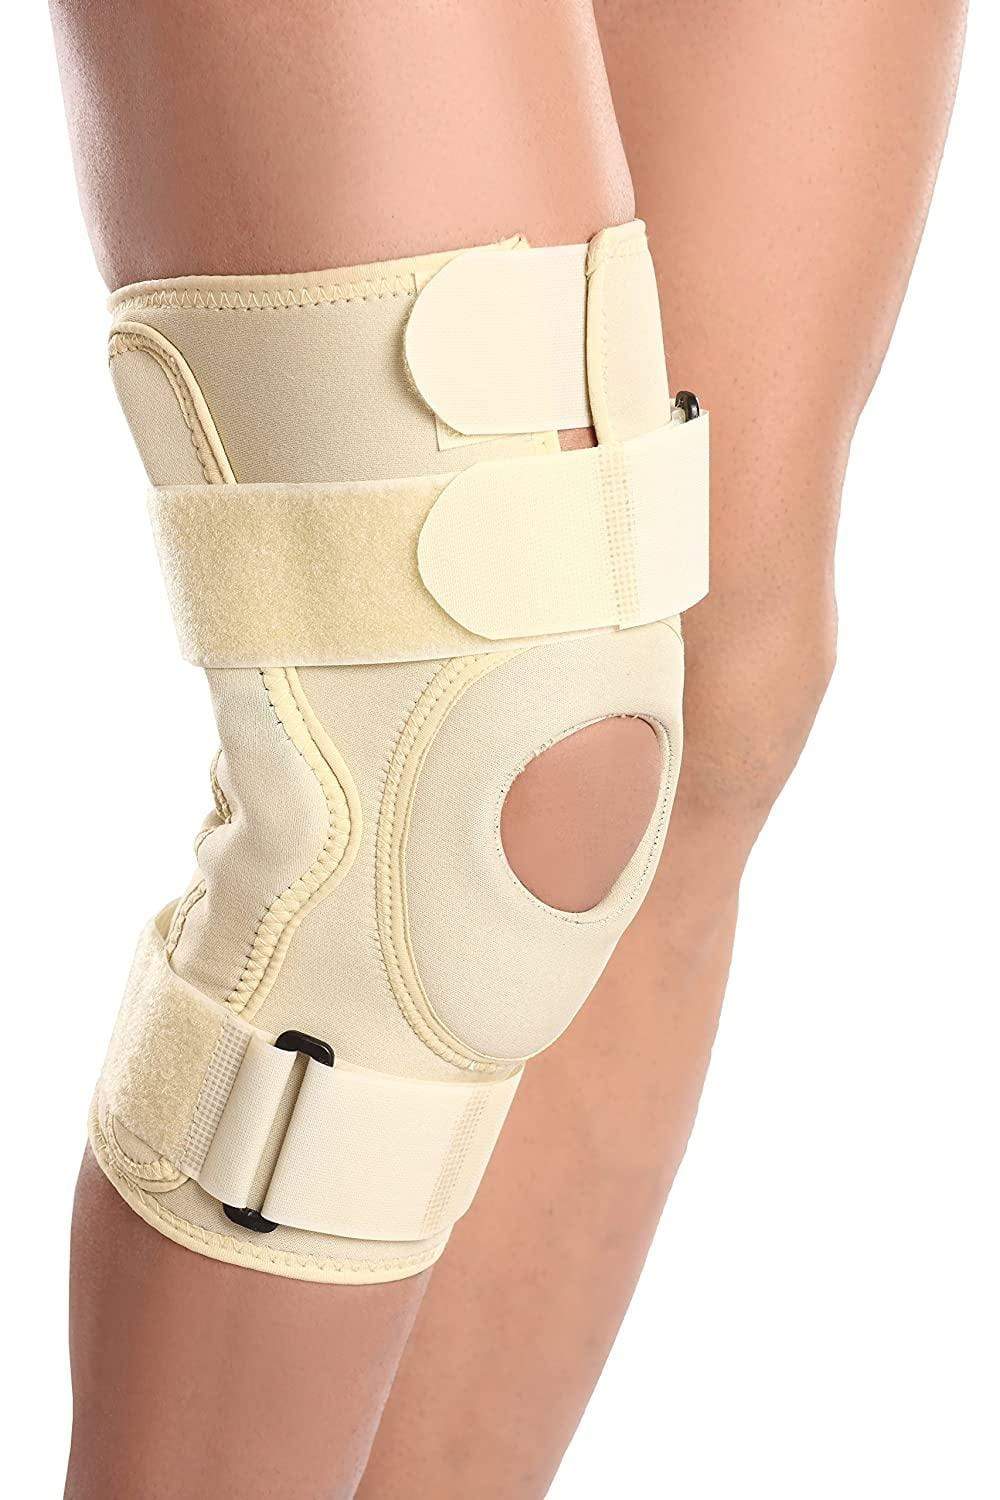 Tynor Knee Support Hinged (Neo) J-01-Health & Personal Care-dealsplant